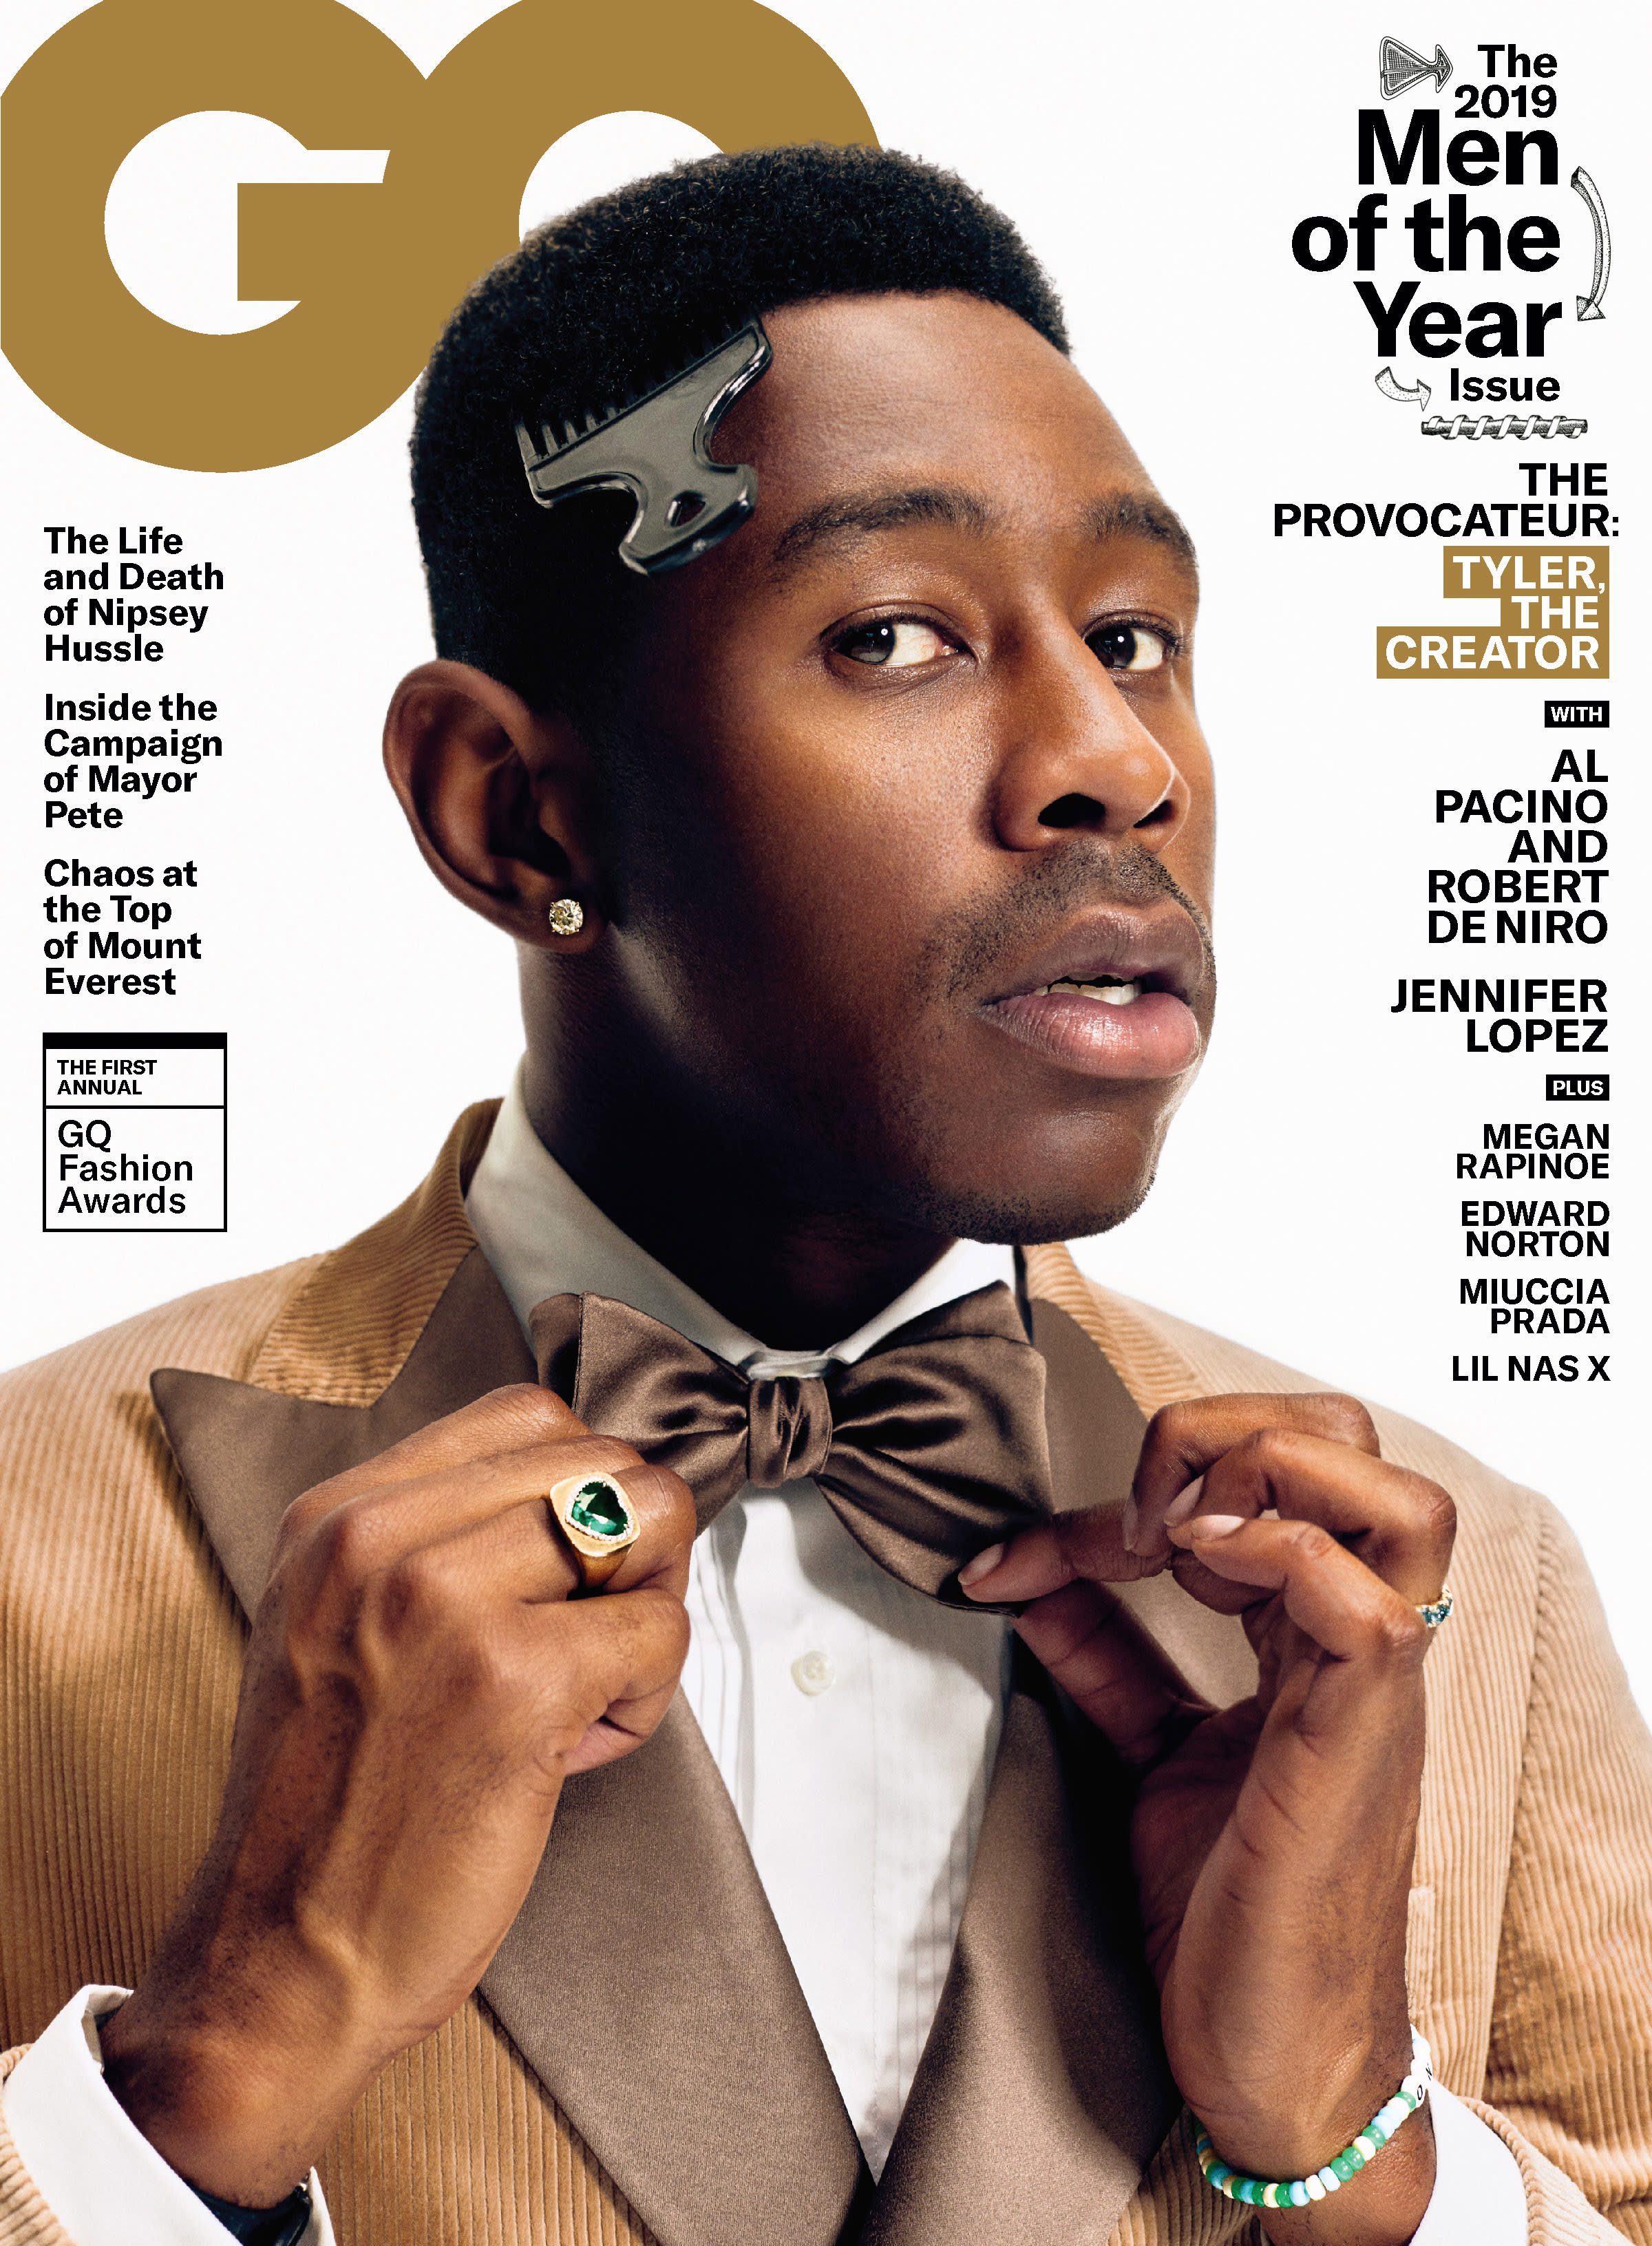 Tyler, the Creator Talks Movies, Selling Out MSG, and More for 'GQ' Men